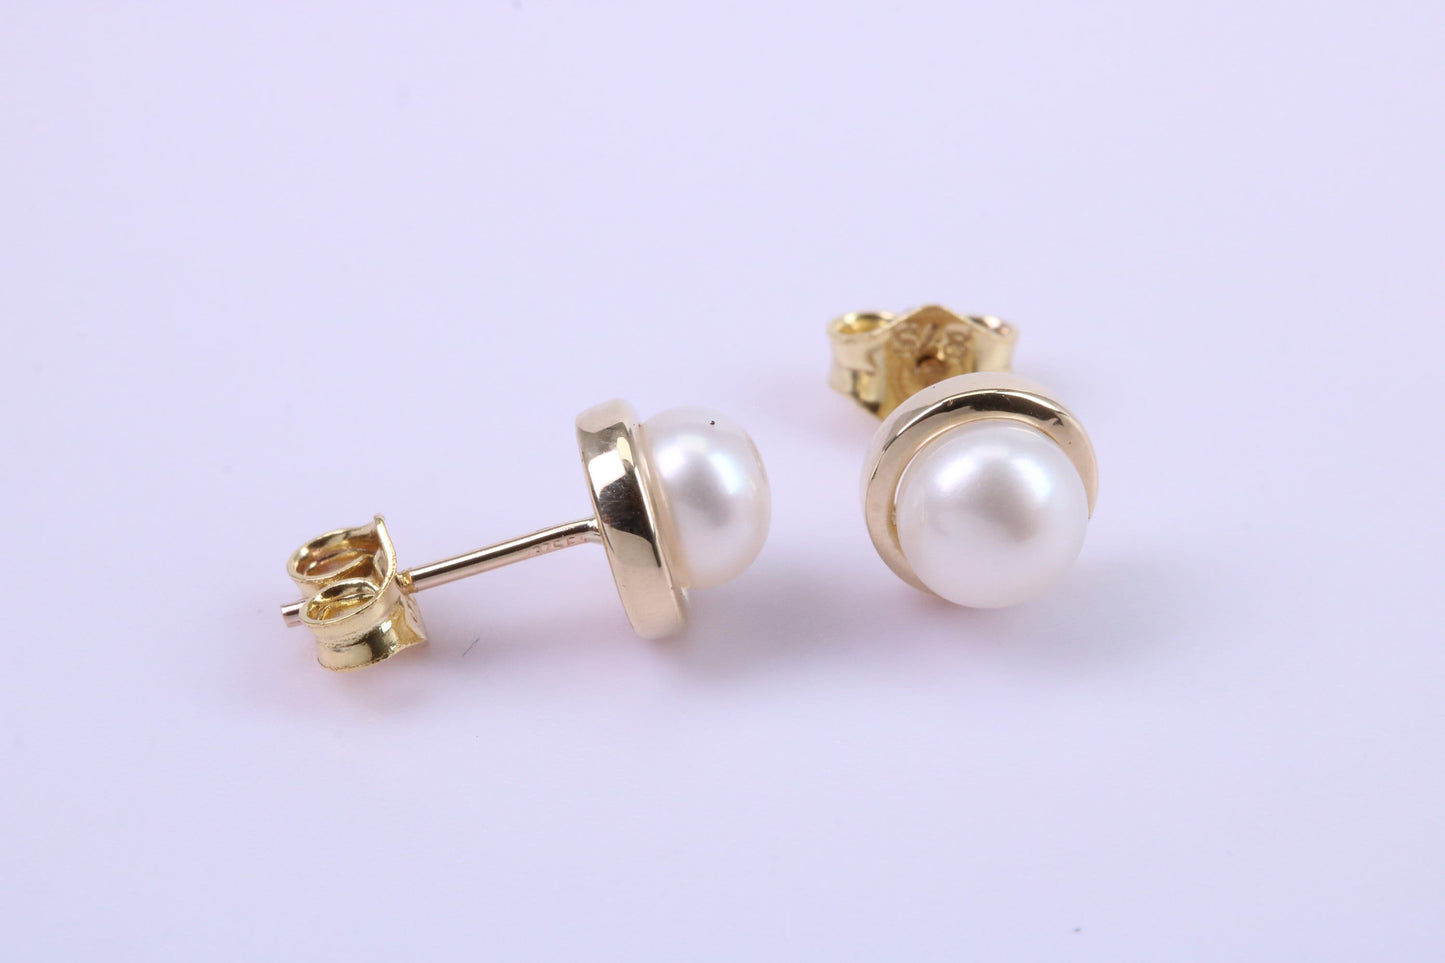 Real Pearl Necklace and Matching Earrings set in Solid Yellow Gold Together with 18 Inch Yellow Gold Chain